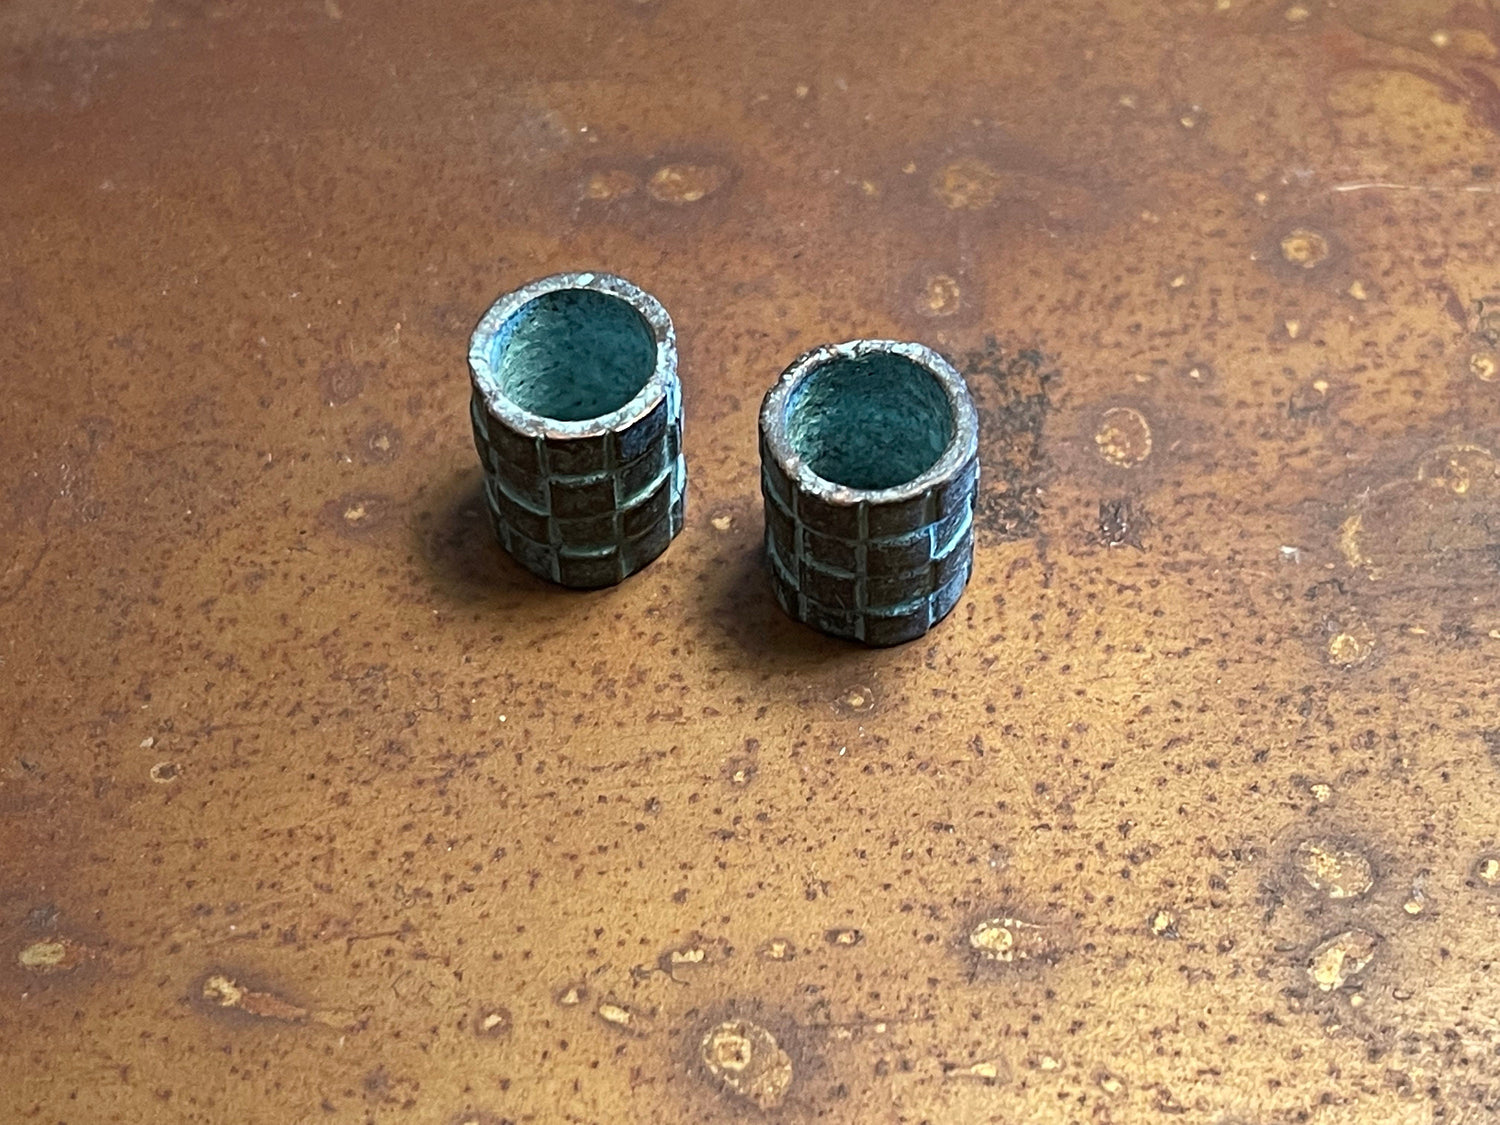 Big hole tube Beads - checkered barrel relief design (lot of 2 or 6) large copper plated green patina findings handcrafted in Mykonos Greece